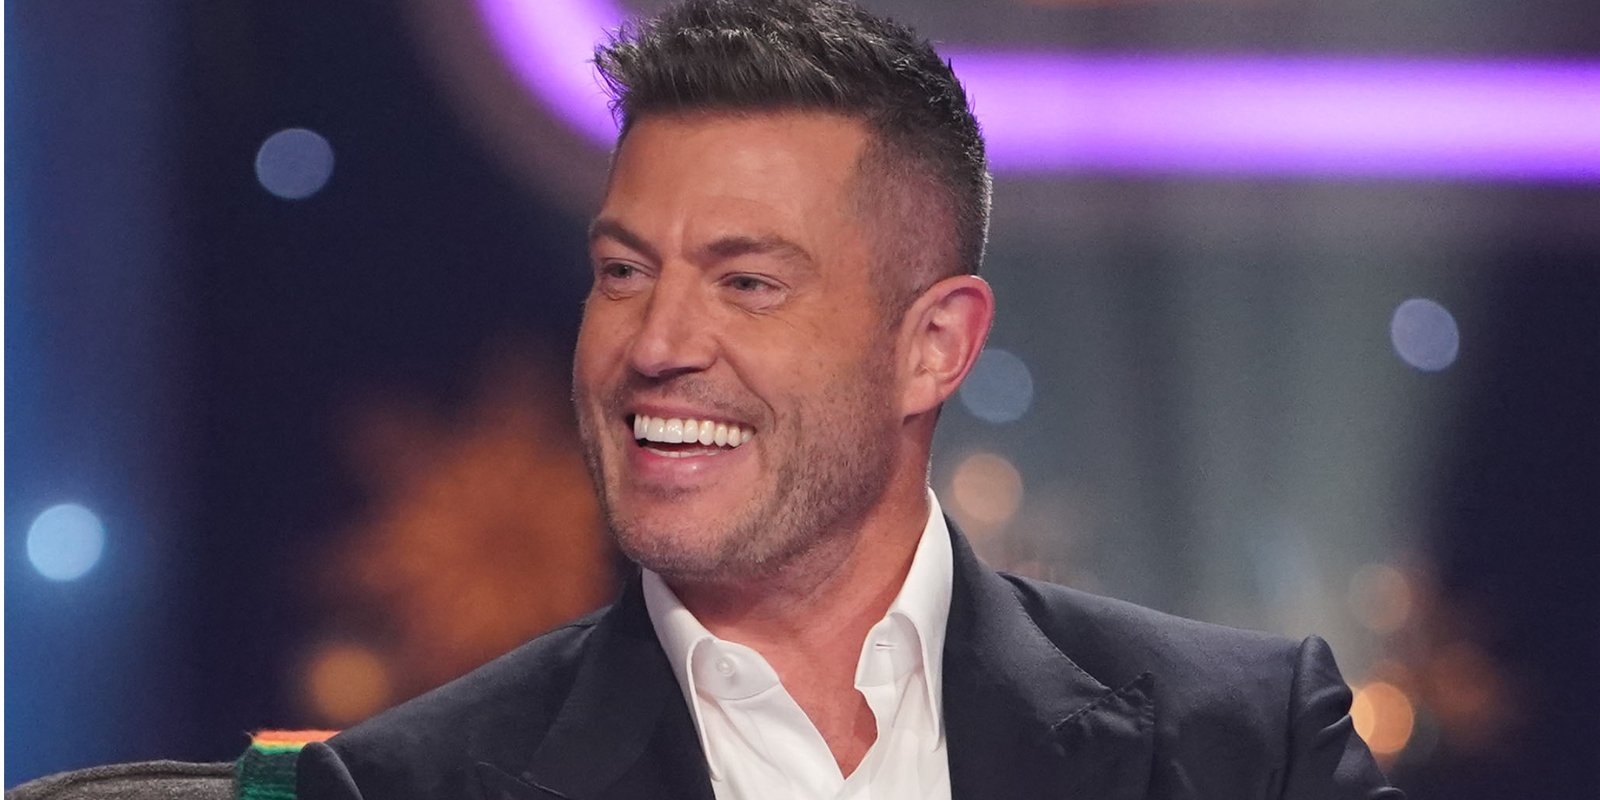 Jesse Palmer is the host of season 27 of 'The Bachelor' on ABC.